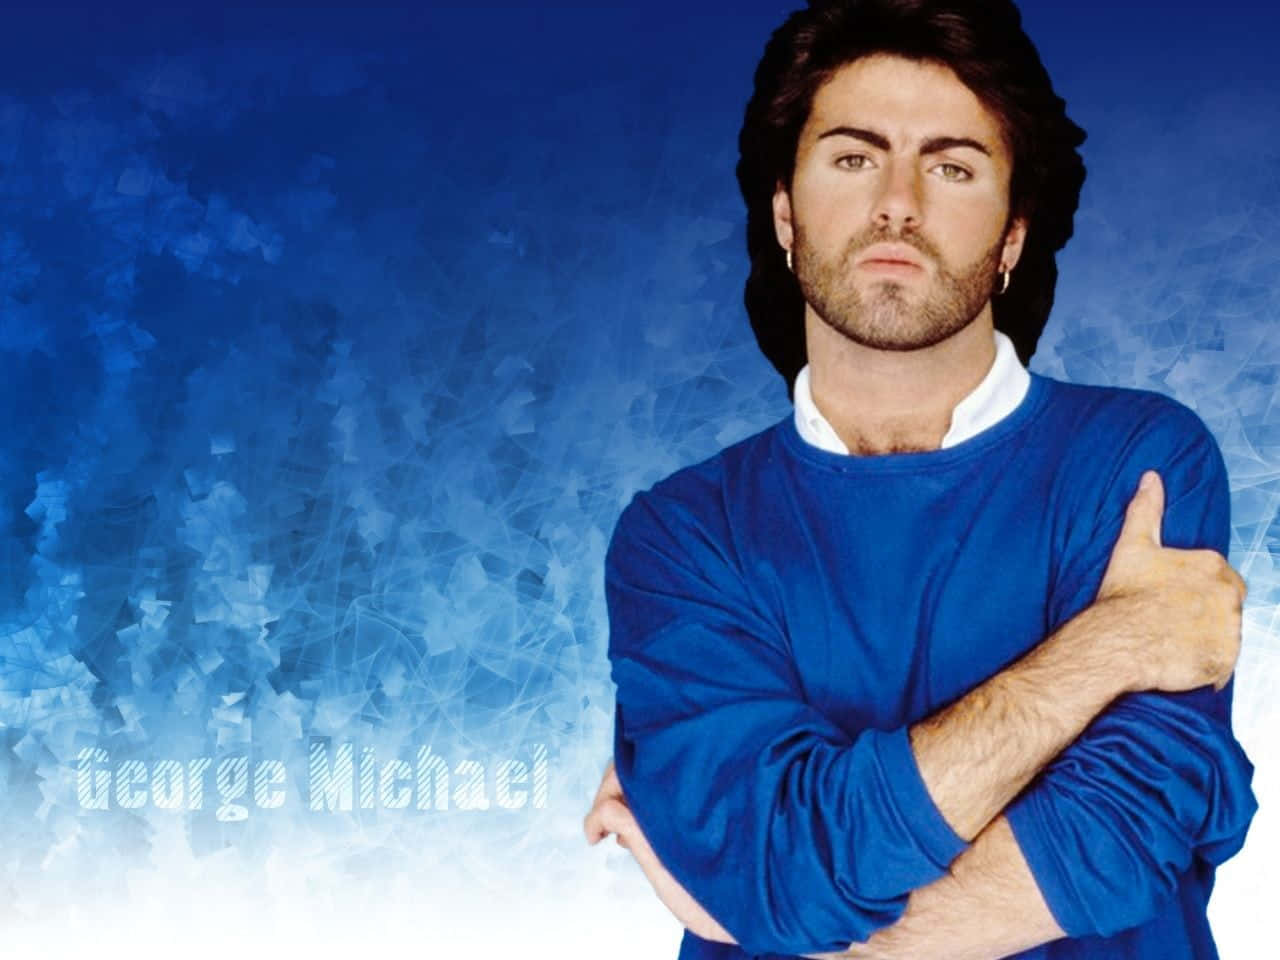 "The Iconic George Michael" Wallpaper